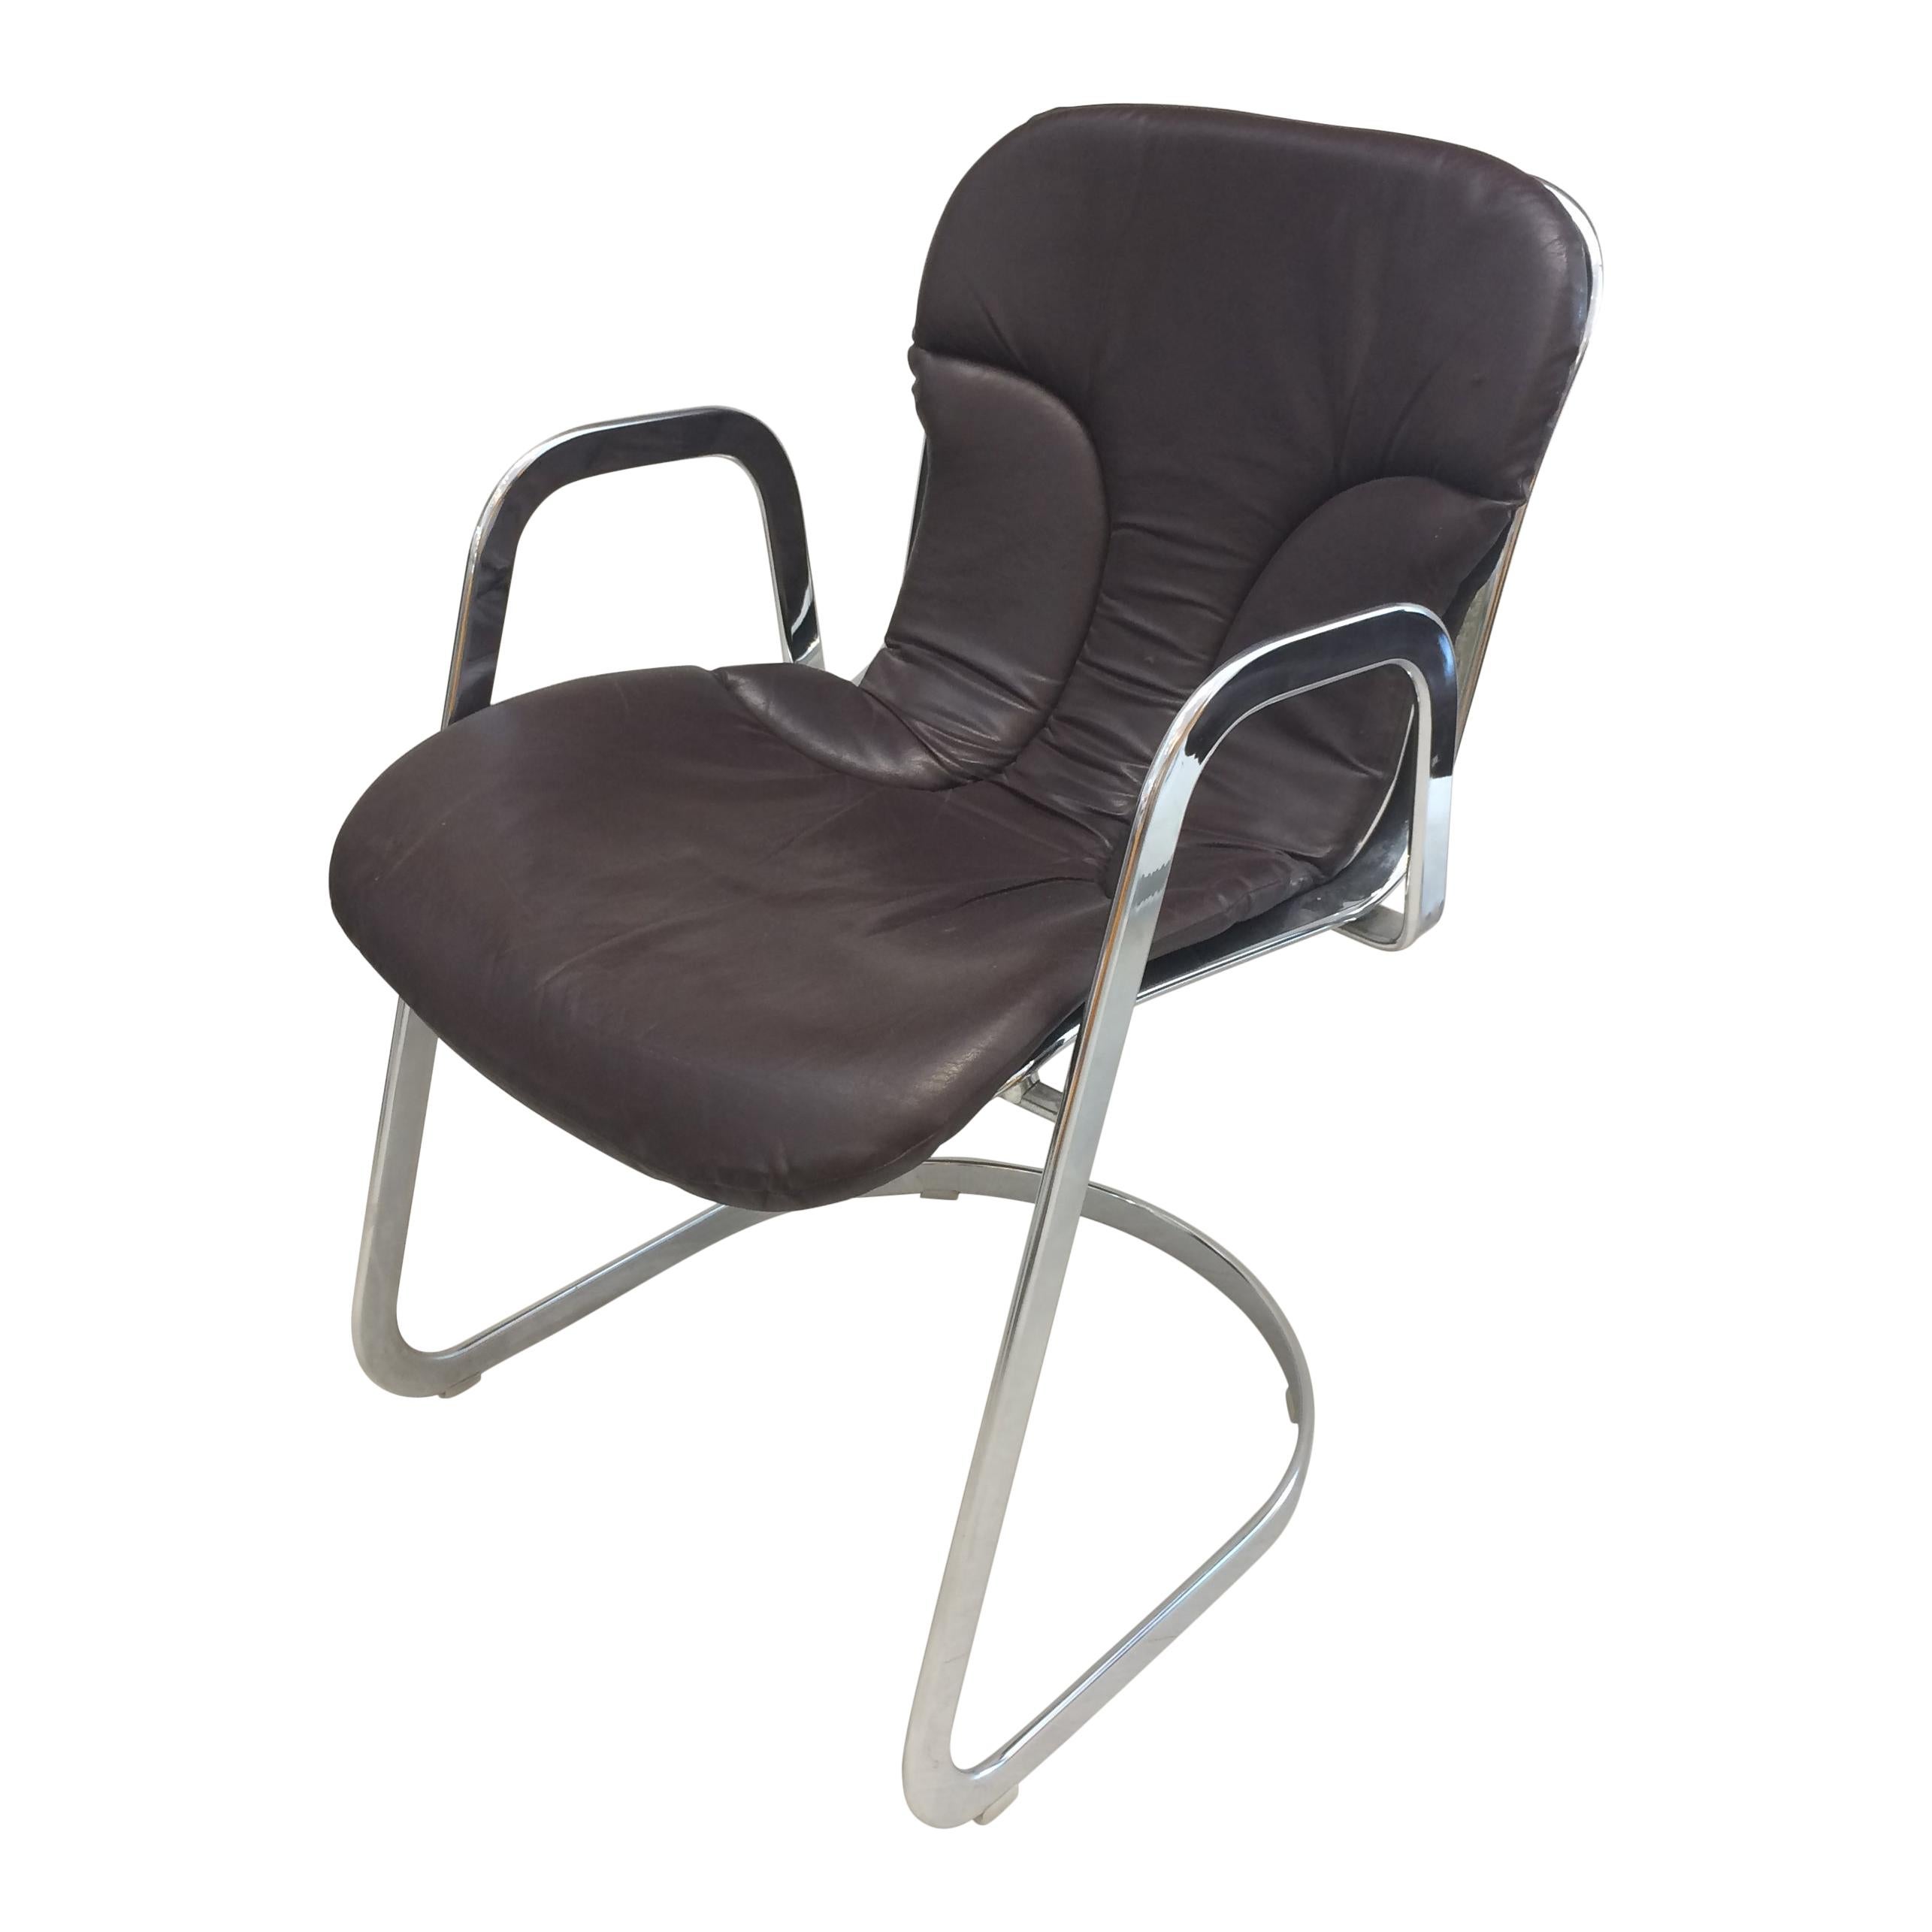 Willy Rizzo Dining Chair Chrome with Chocolate Leather Seat Cushion